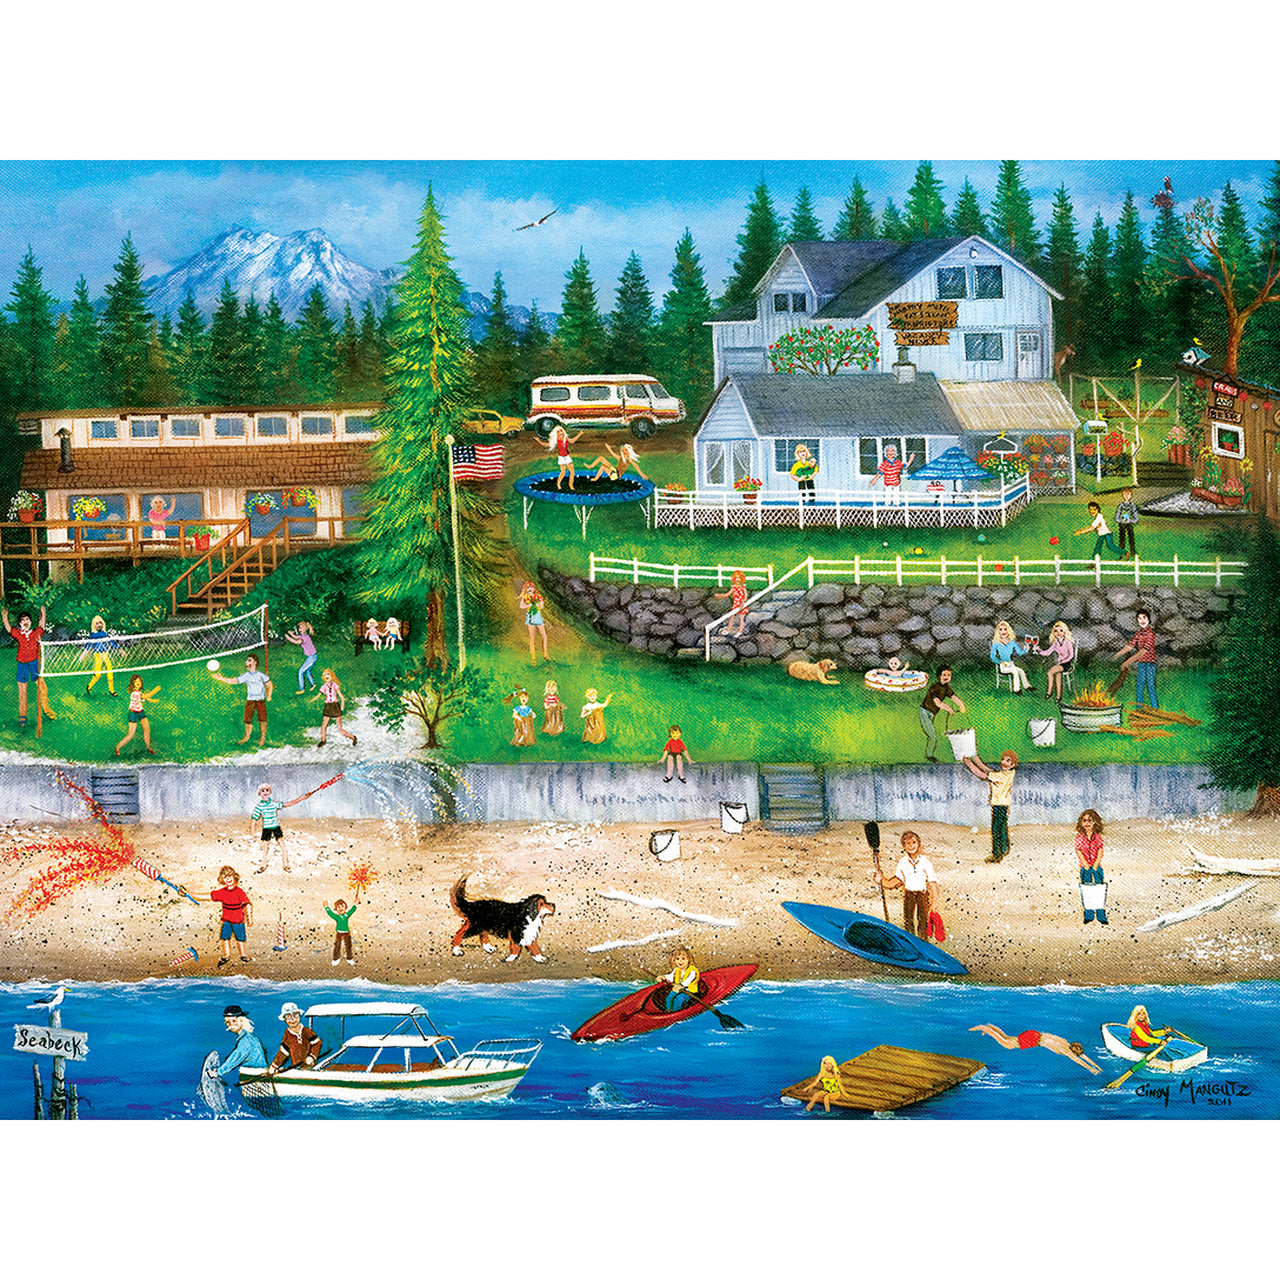 Homegrown - 4th of July at Seabeck 750 Piece Jigsaw Puzzle by Masterpieces